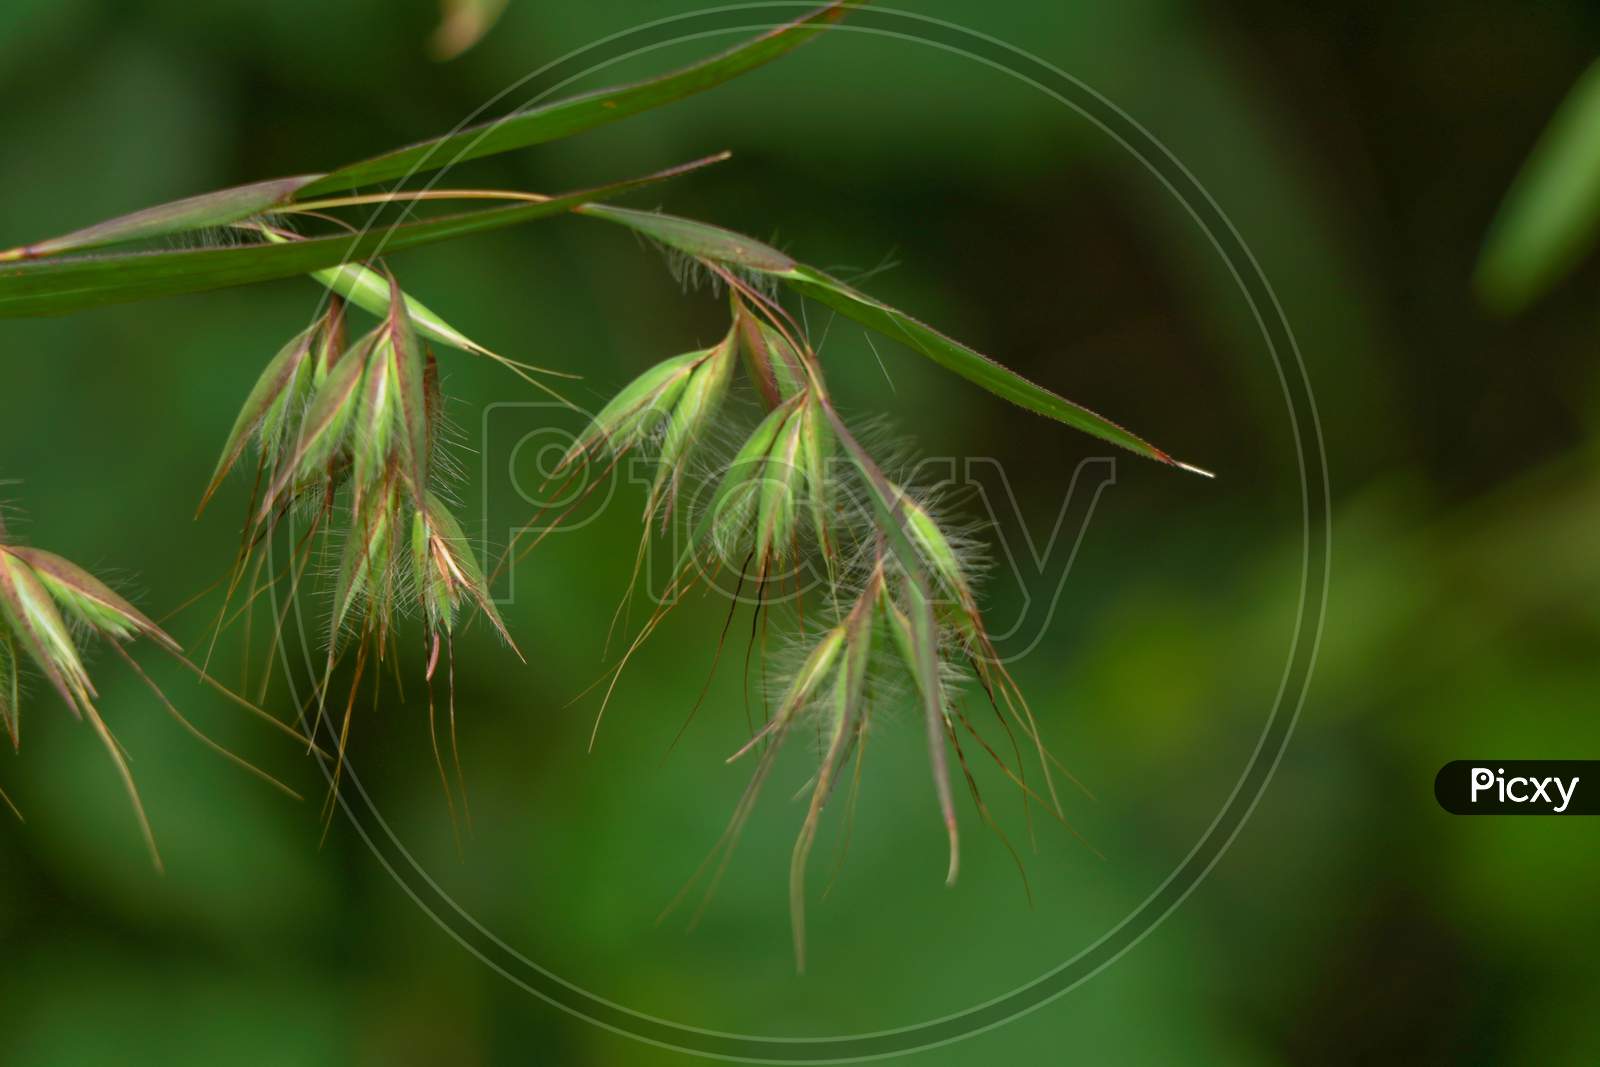 Beautiful Flowers Of A Wild Grass From Western Ghats